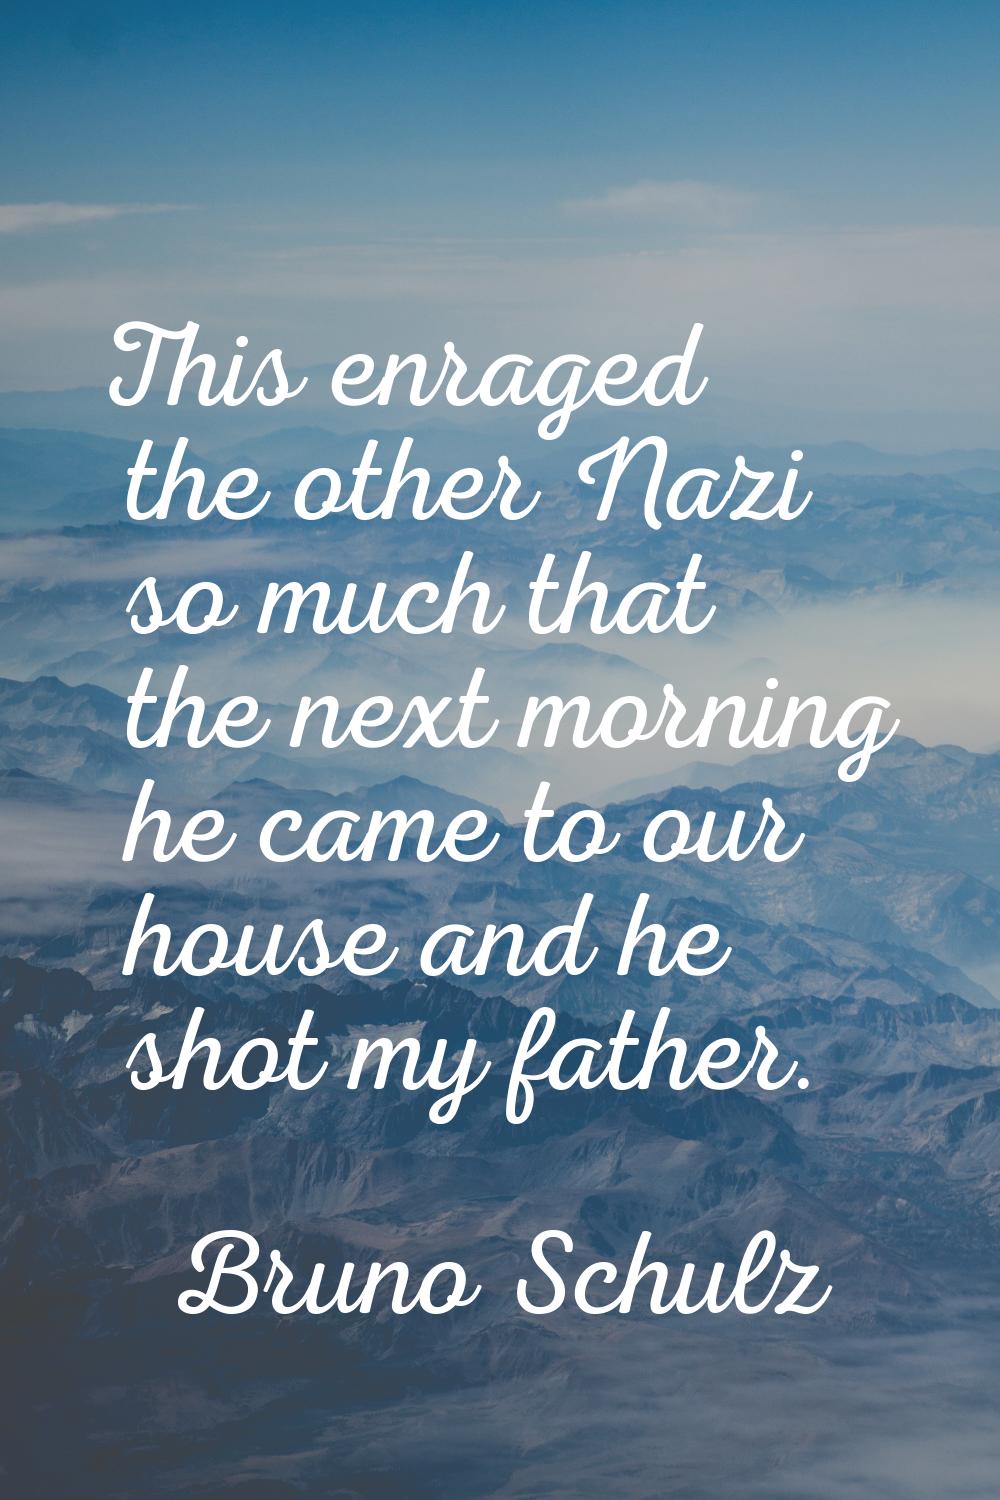 This enraged the other Nazi so much that the next morning he came to our house and he shot my fathe